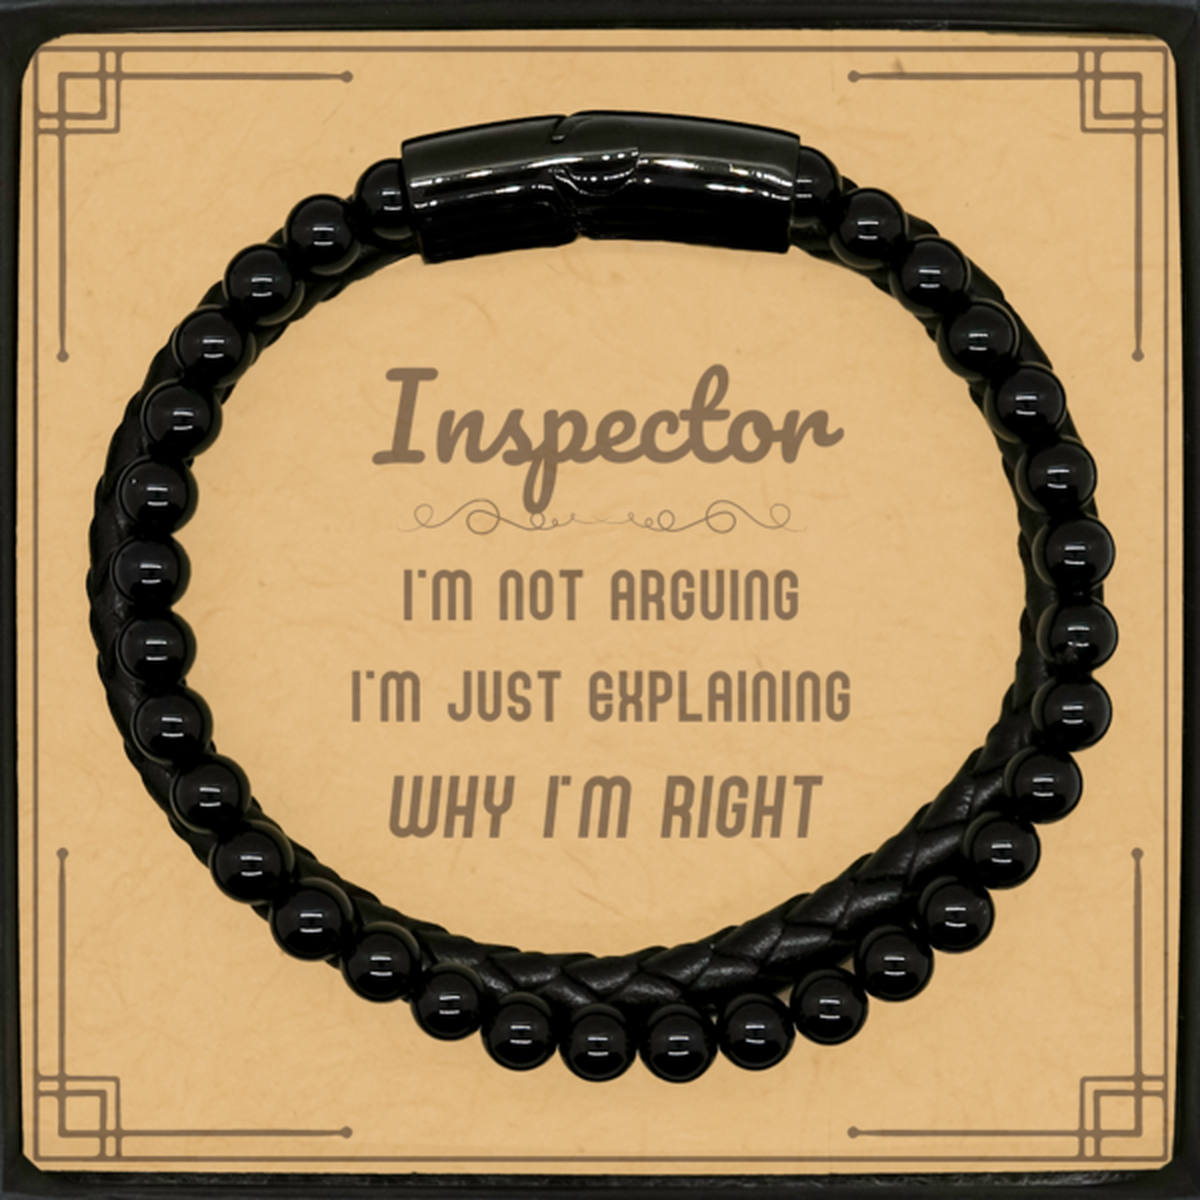 Inspector I'm not Arguing. I'm Just Explaining Why I'm RIGHT Stone Leather Bracelets, Funny Saying Quote Inspector Gifts For Inspector Message Card Graduation Birthday Christmas Gifts for Men Women Coworker